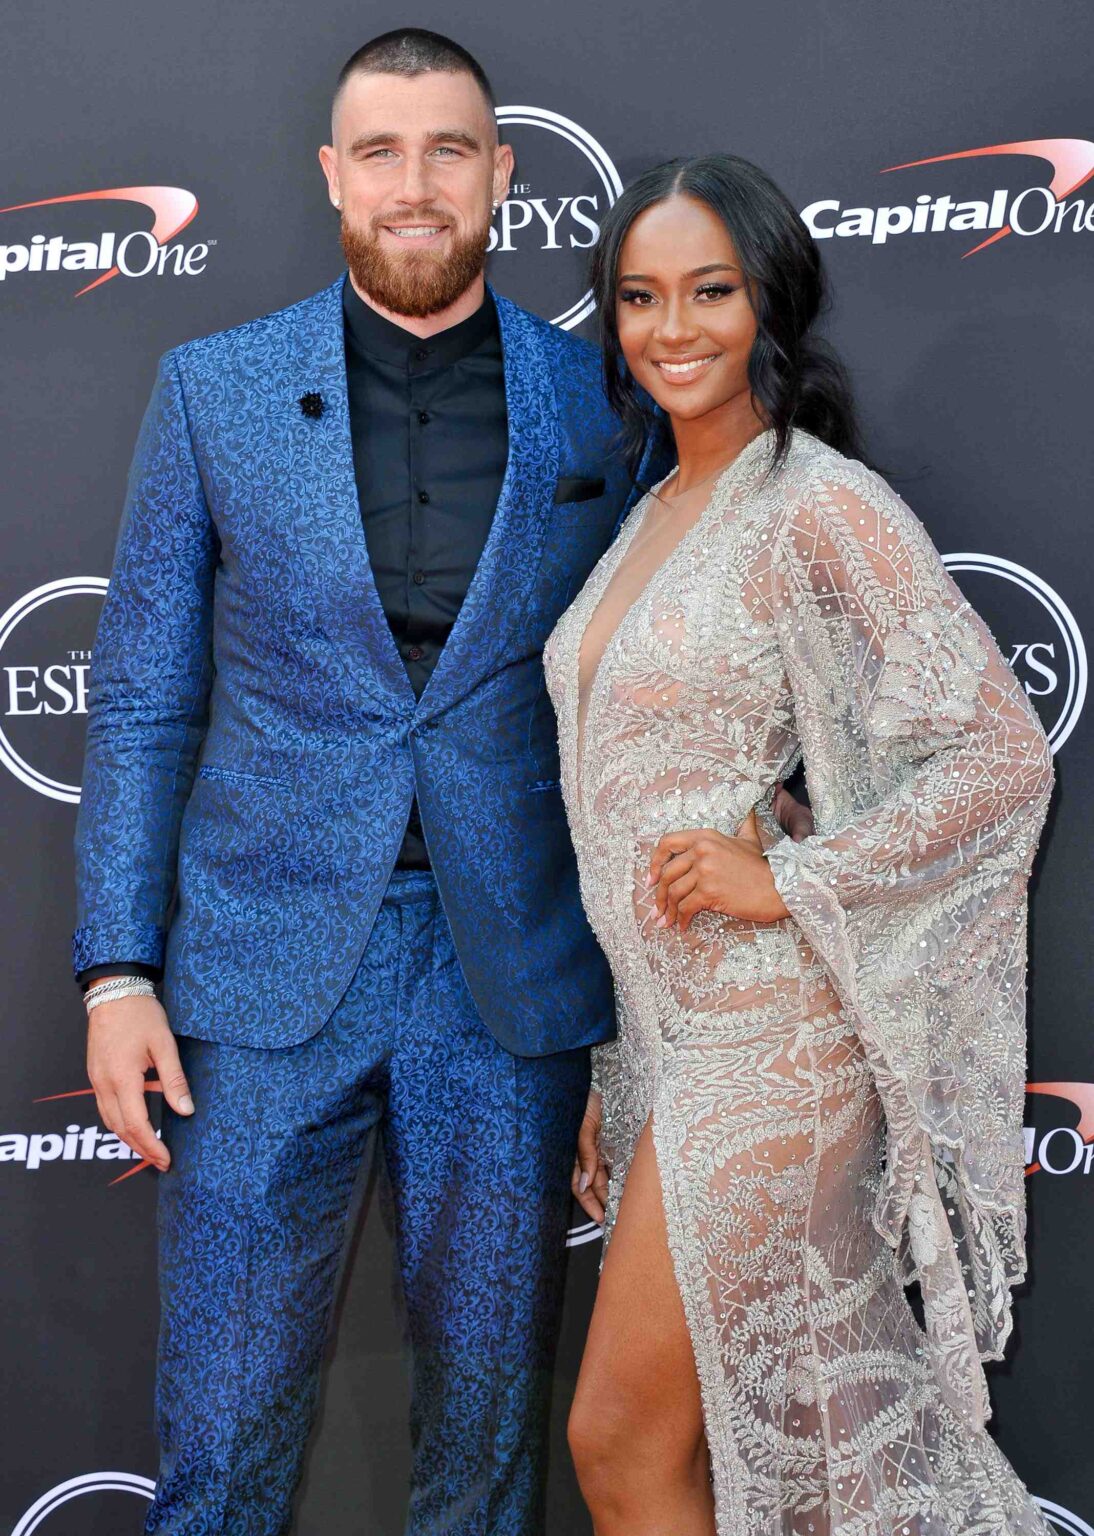 Dive into the Twitter tornado as Travis Kelce and Kayla Nicole redefine couple goals. Expect snark, touchdowns and enchanting NFL charm. Click now, brace for impact.